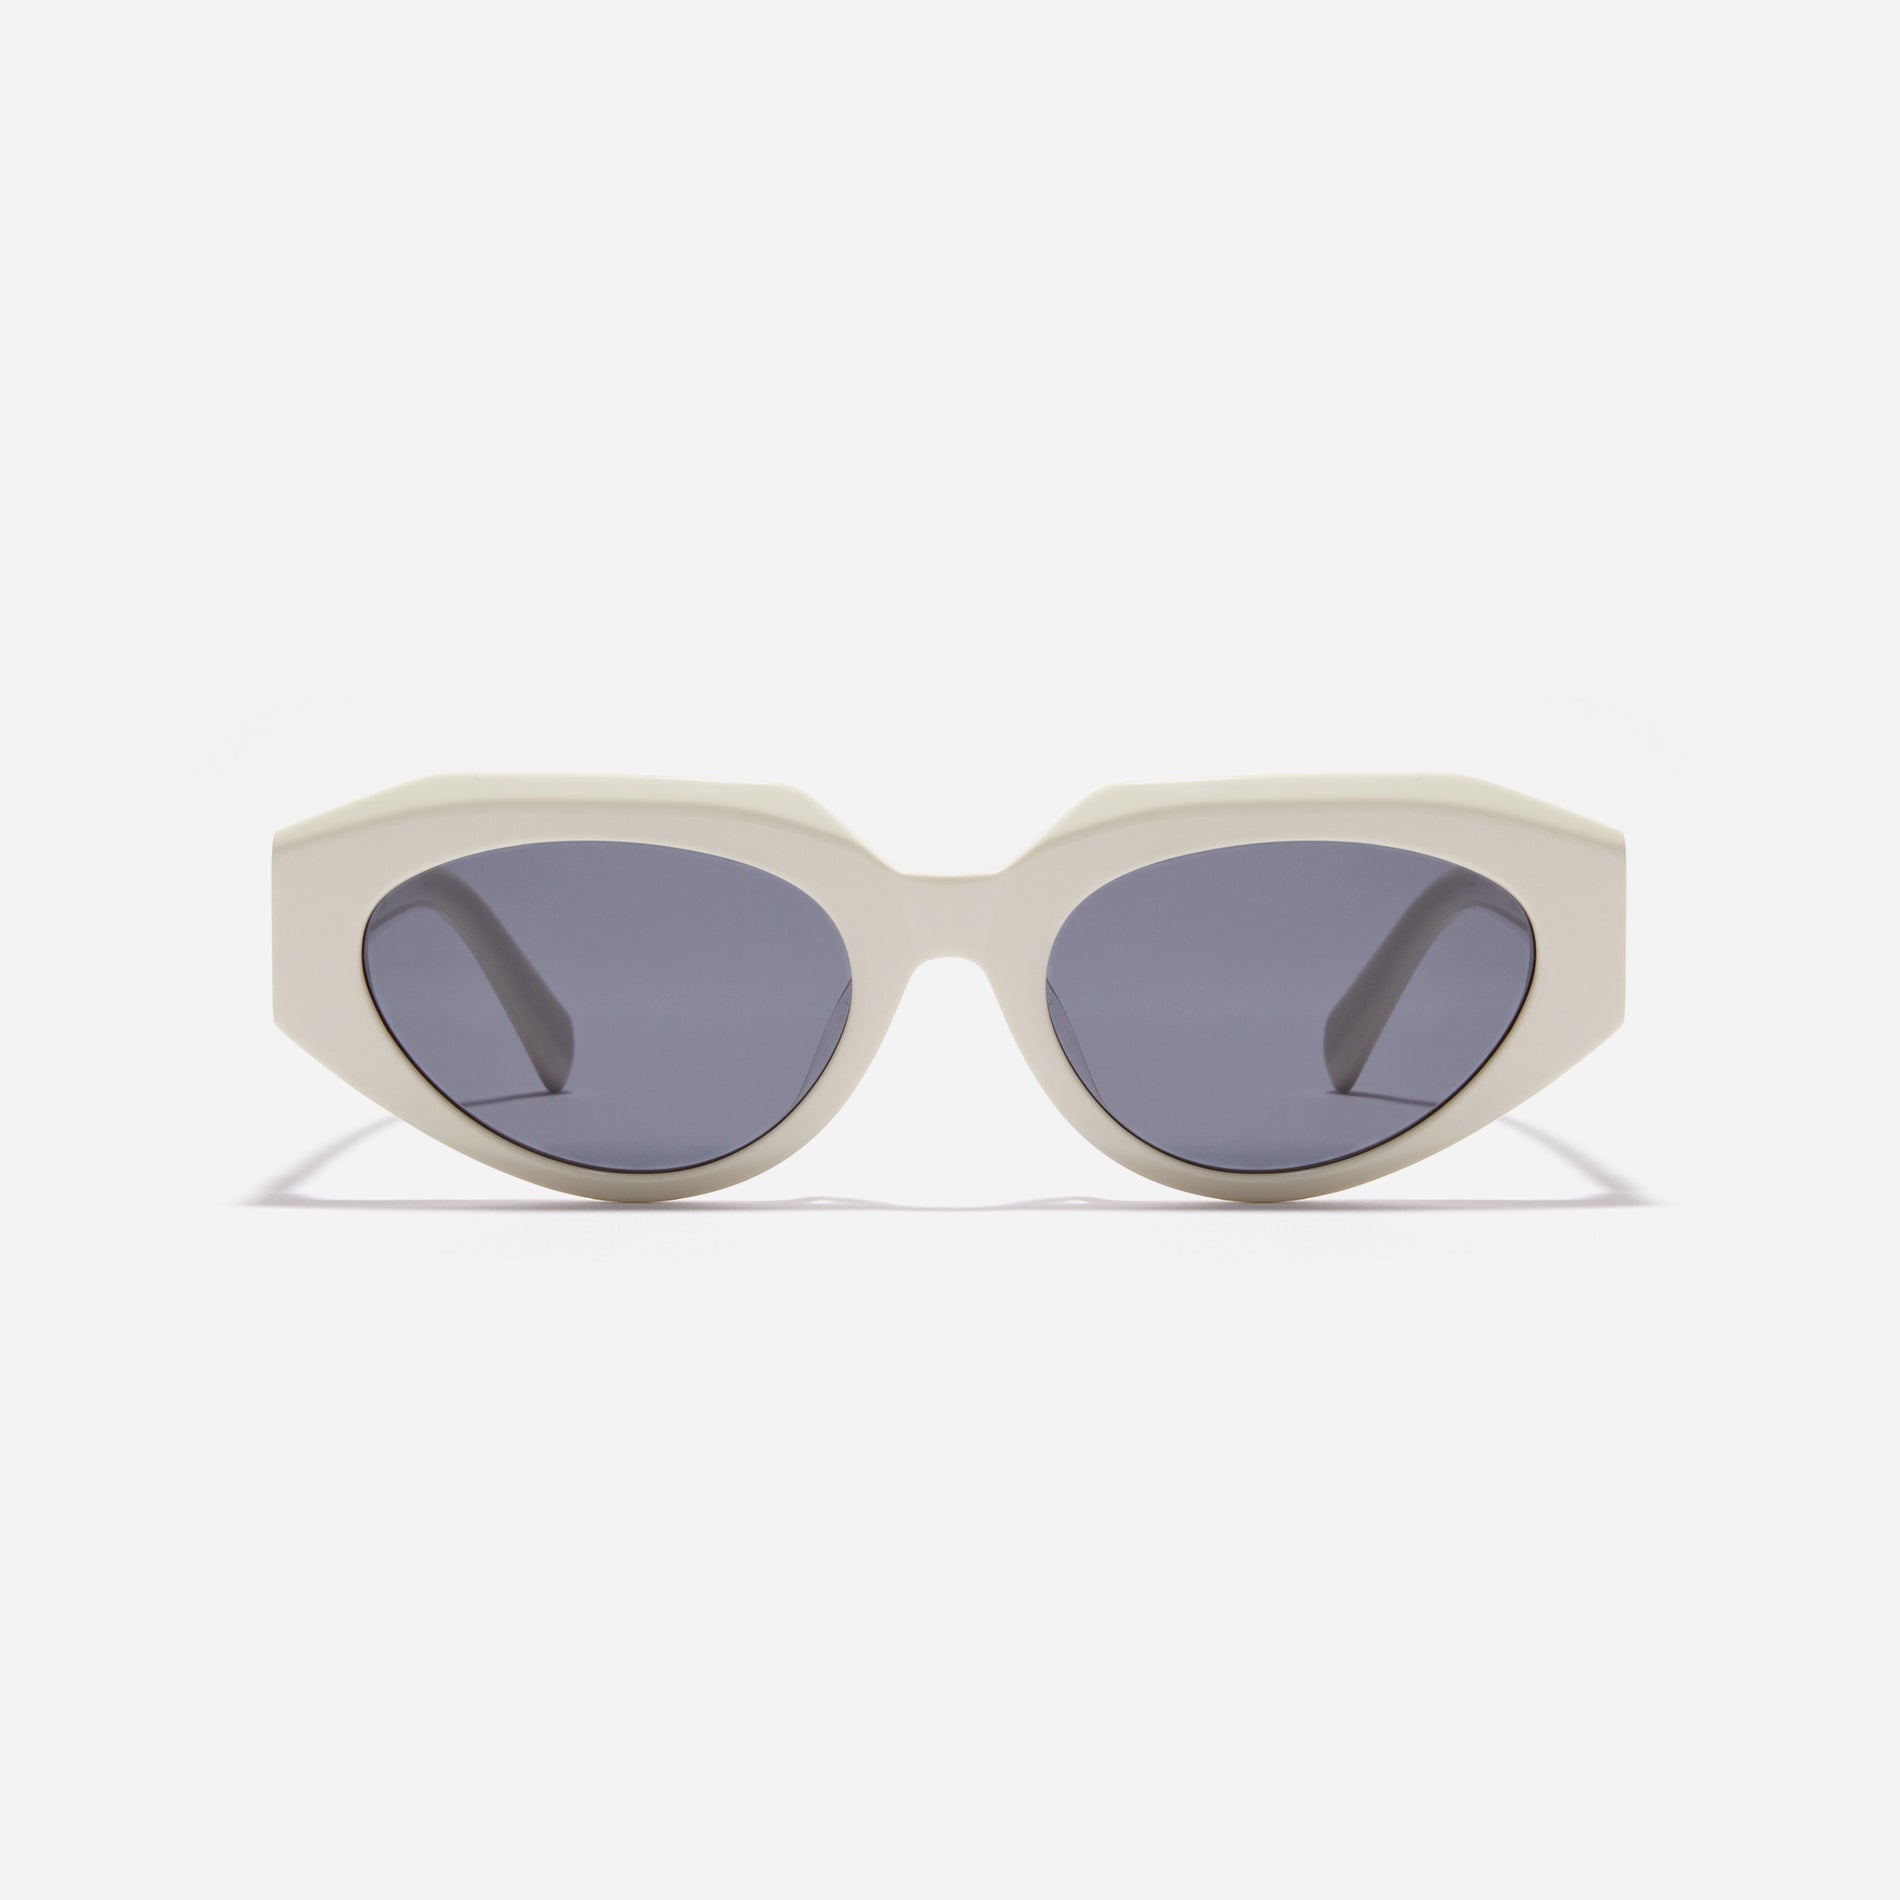 Born from the CARIN x OIOICOLLECTION collaboration, the FACET sunglasses are designed with a sleek narrow rim style that gives a modern twist to the '90s retro vibe. The temples showcase a newly redesigned OIC logo emblem, highlighted by a soft color palette, adding a touch of fashion-forward style.